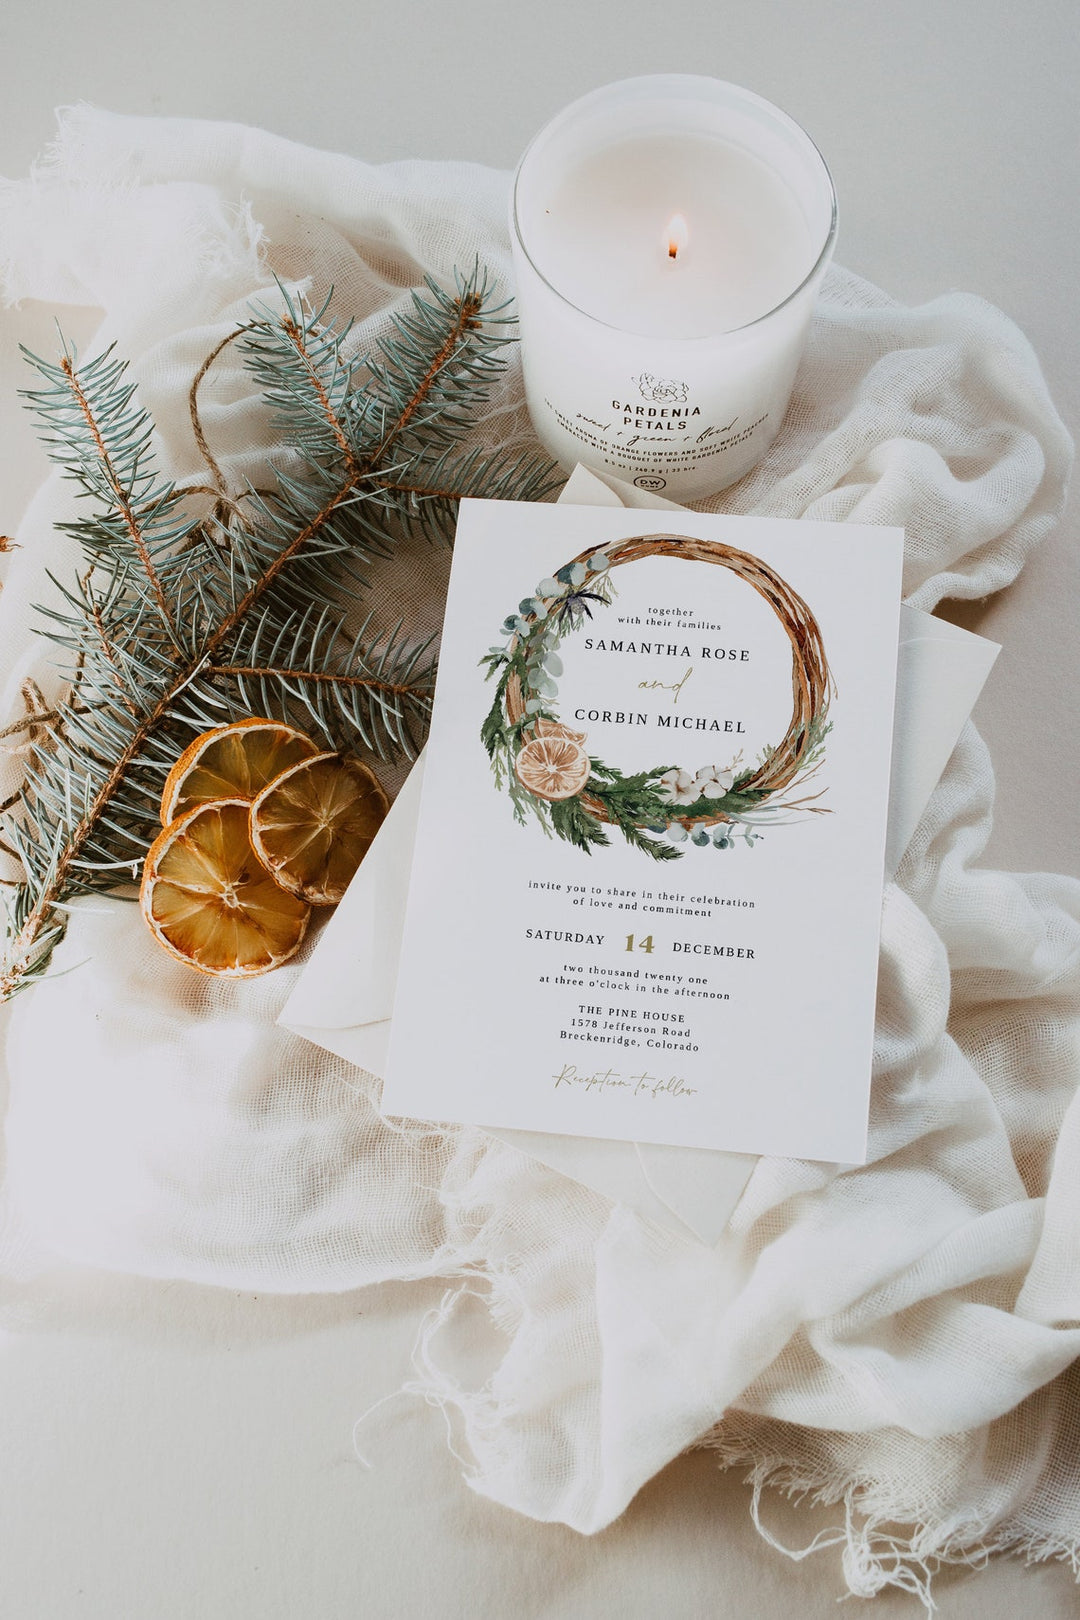 10 Winter Wedding Trends To Heat Up Your Cold Weather Ceremony